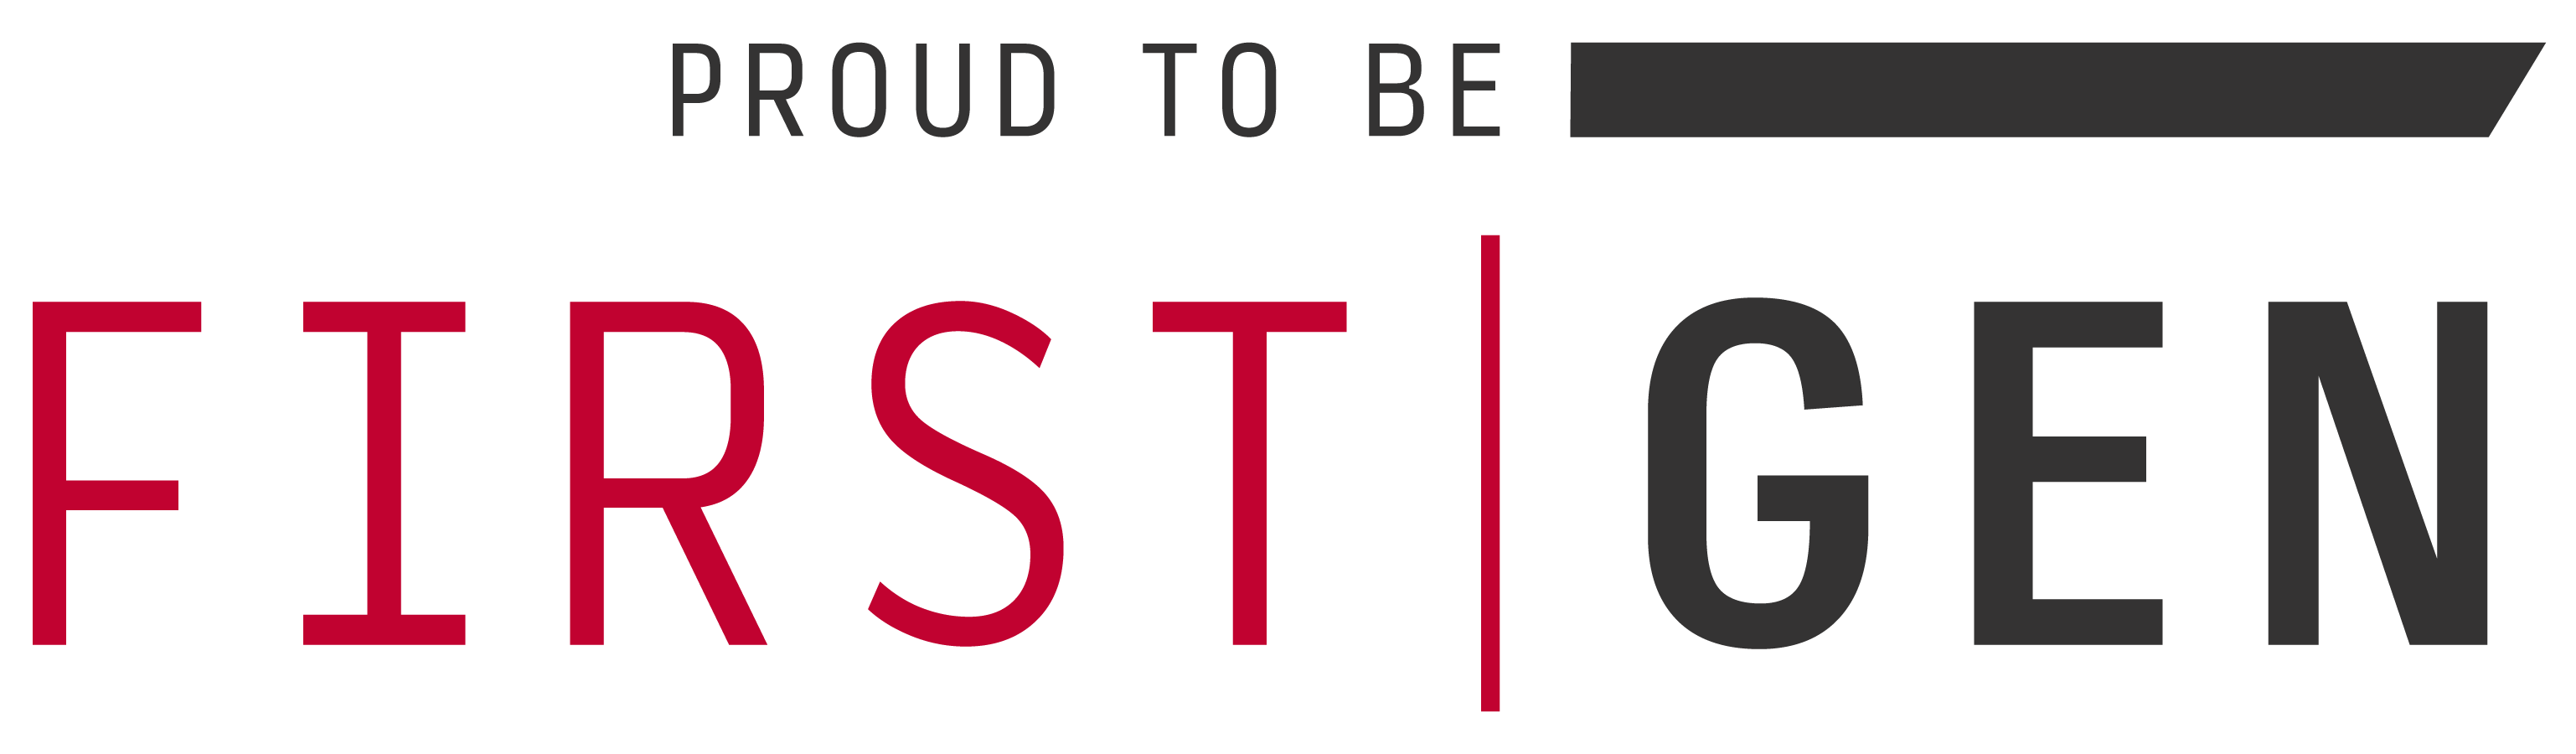 Proud to be First-Gen logo